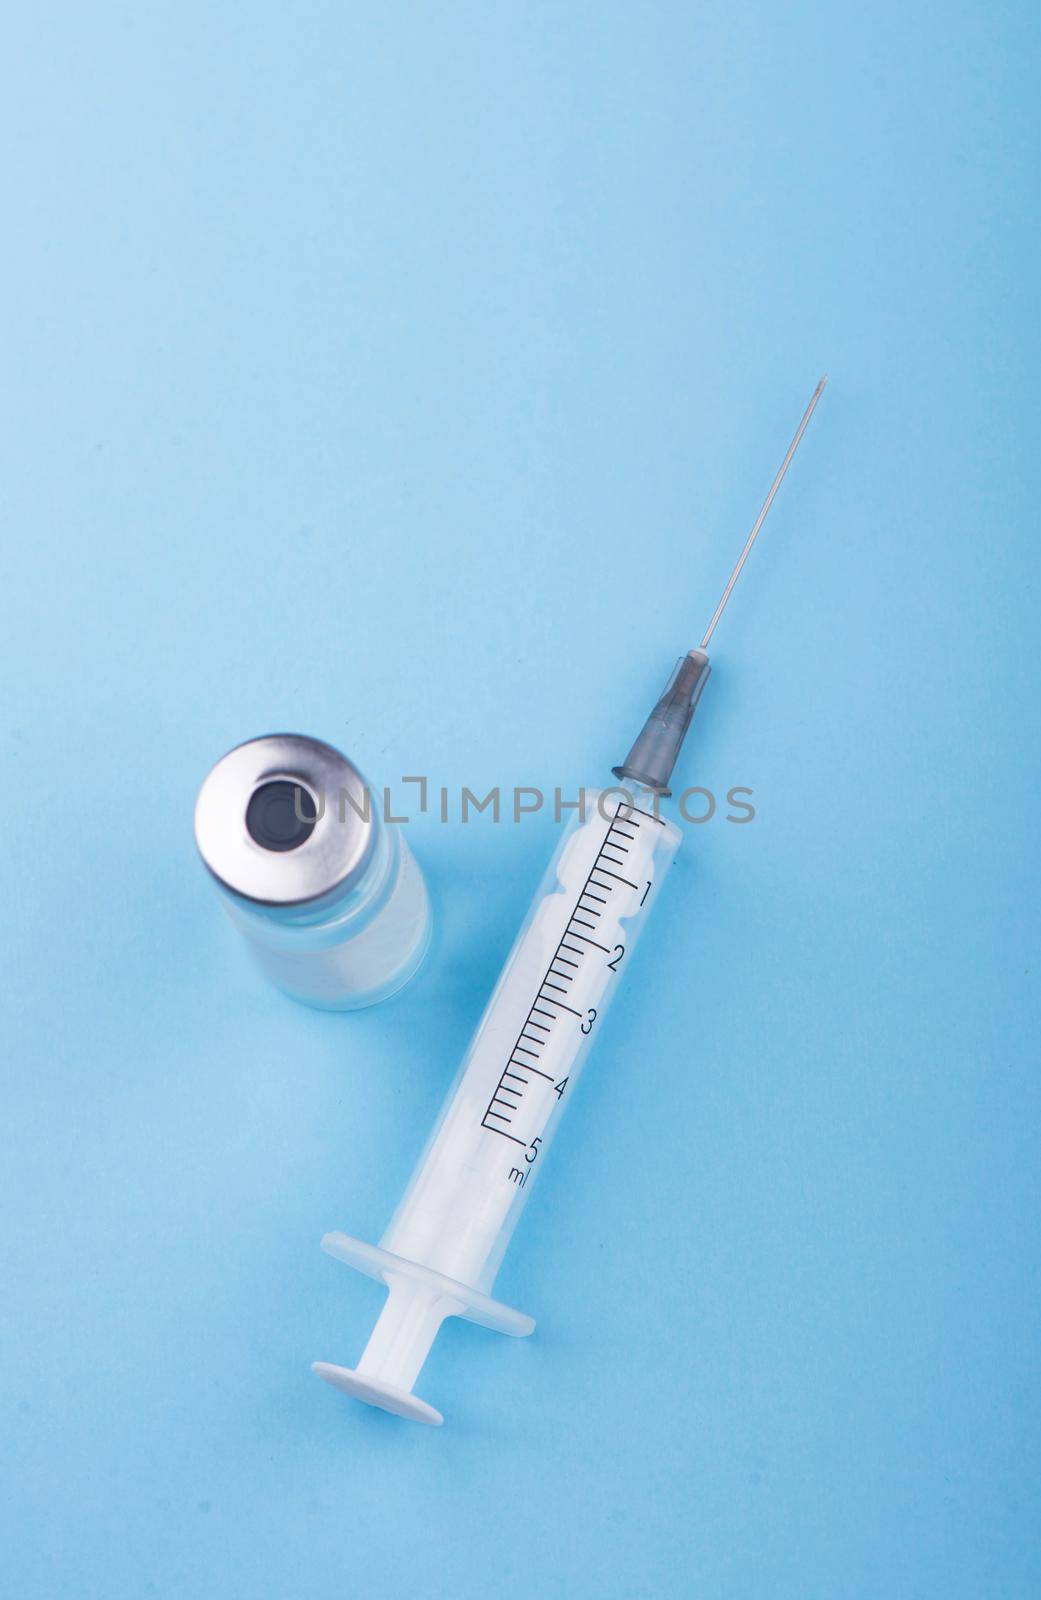 syringe on the table, medical supplies are on the table by aprilphoto